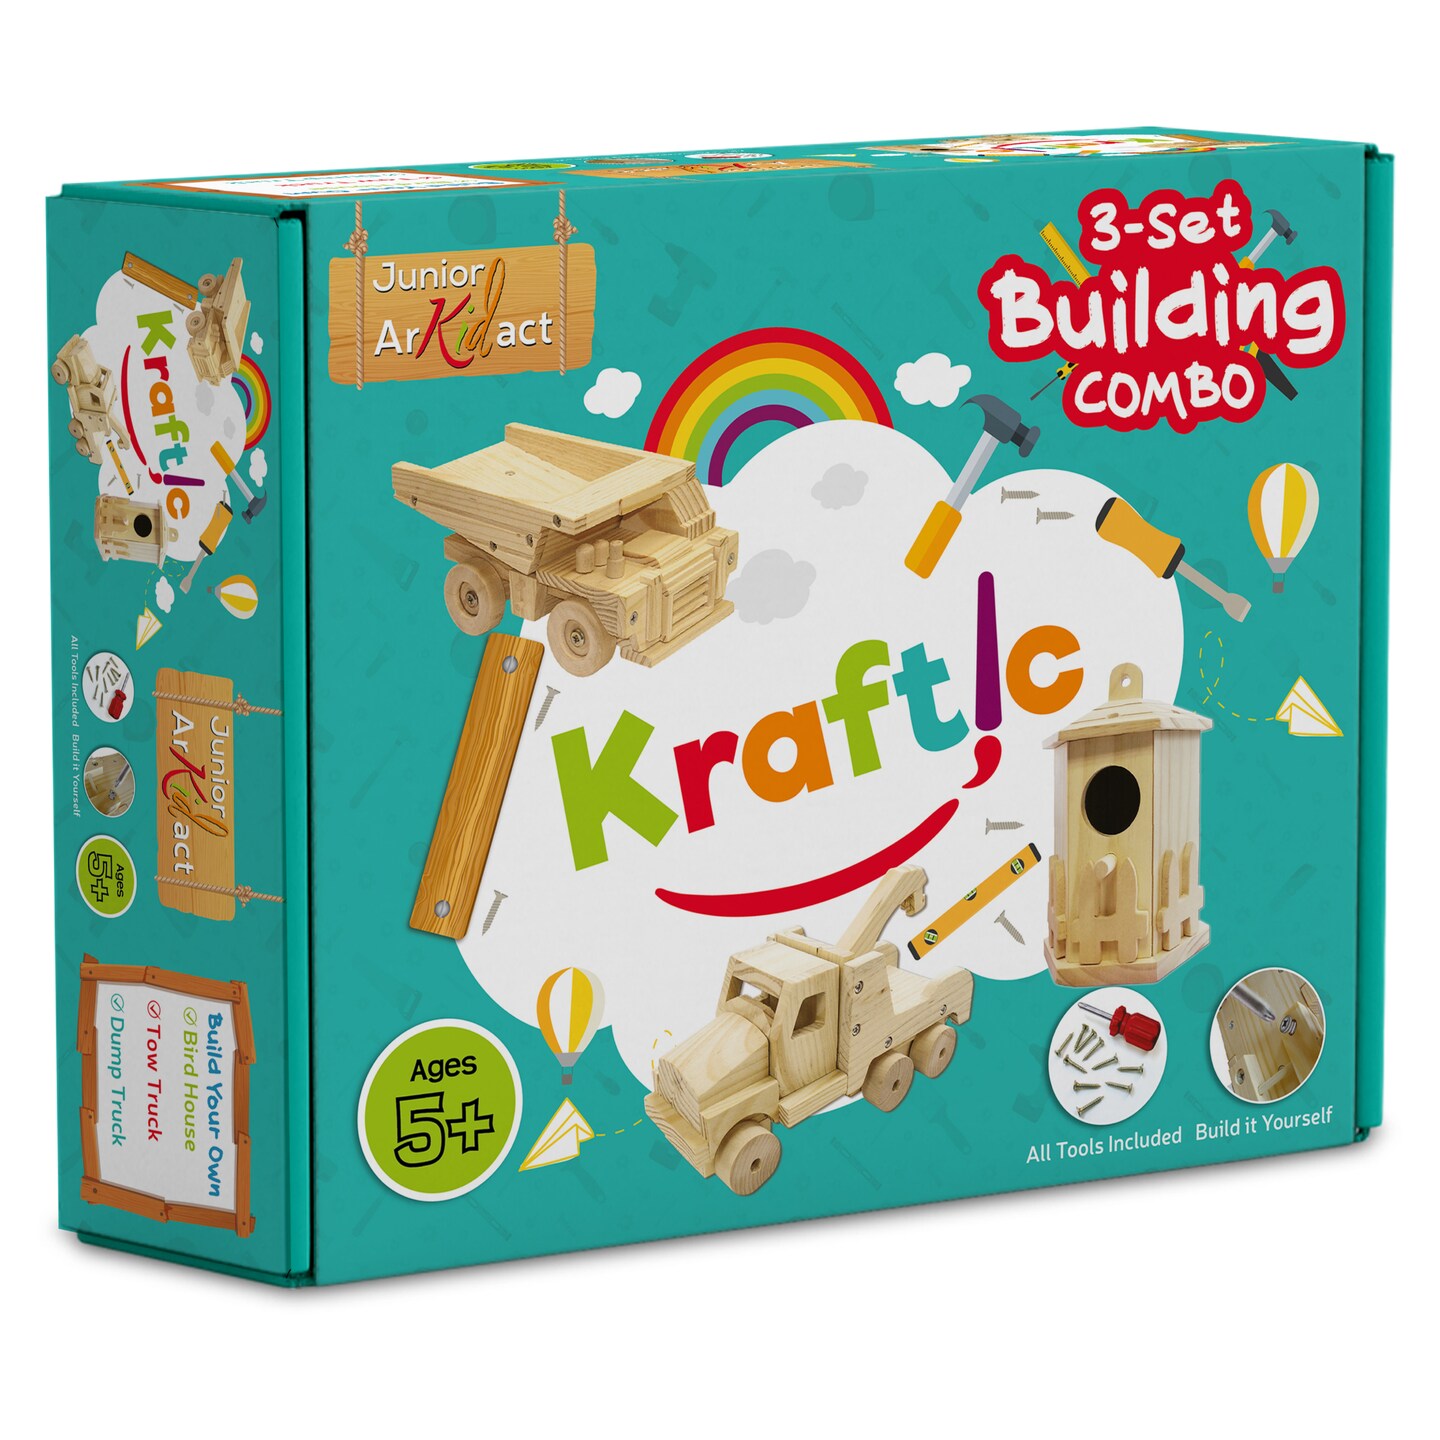 Kraftic Woodworking Building Kit for Kids and Adults, with 3 Educational  DIY Carpentry Construction Wood Model Kit Toy Projects for Boys and Girls -  Tow Truck, Birdhouse and Dump Truck